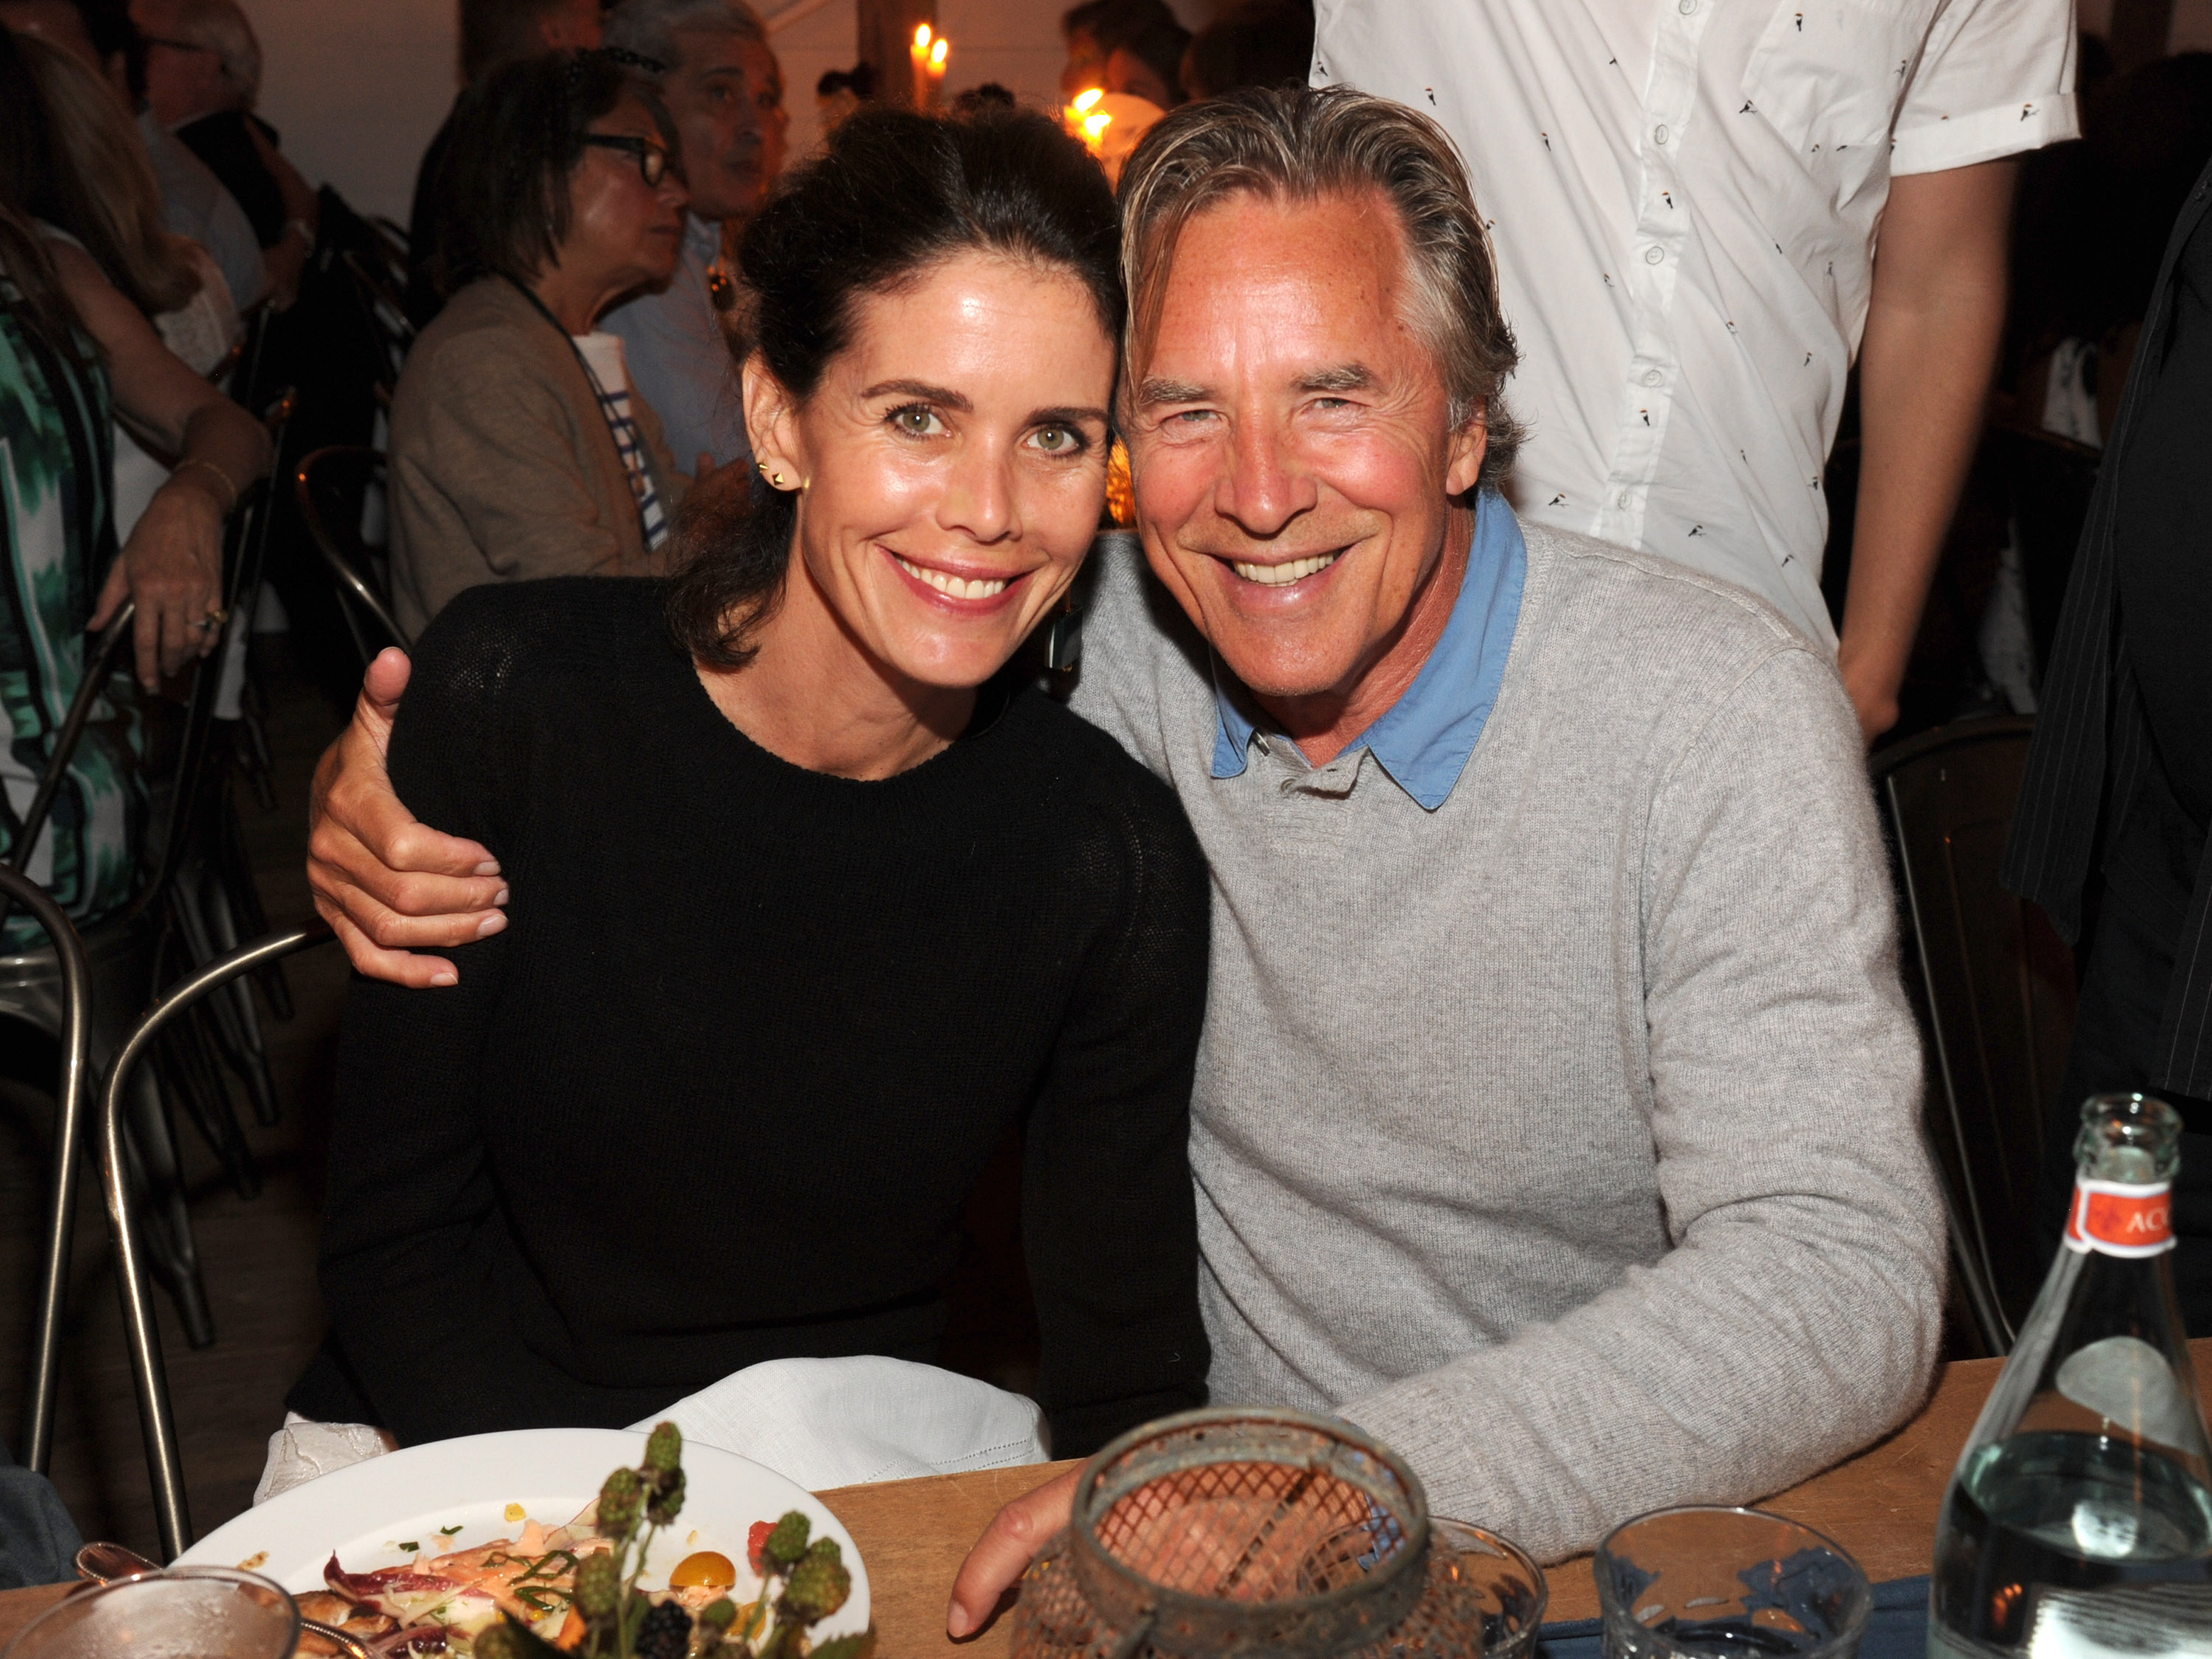 Kelley Phleger and Don Johnson at The Creeks on August 16, 2014 in East Hampton, New York | Source: Getty Images